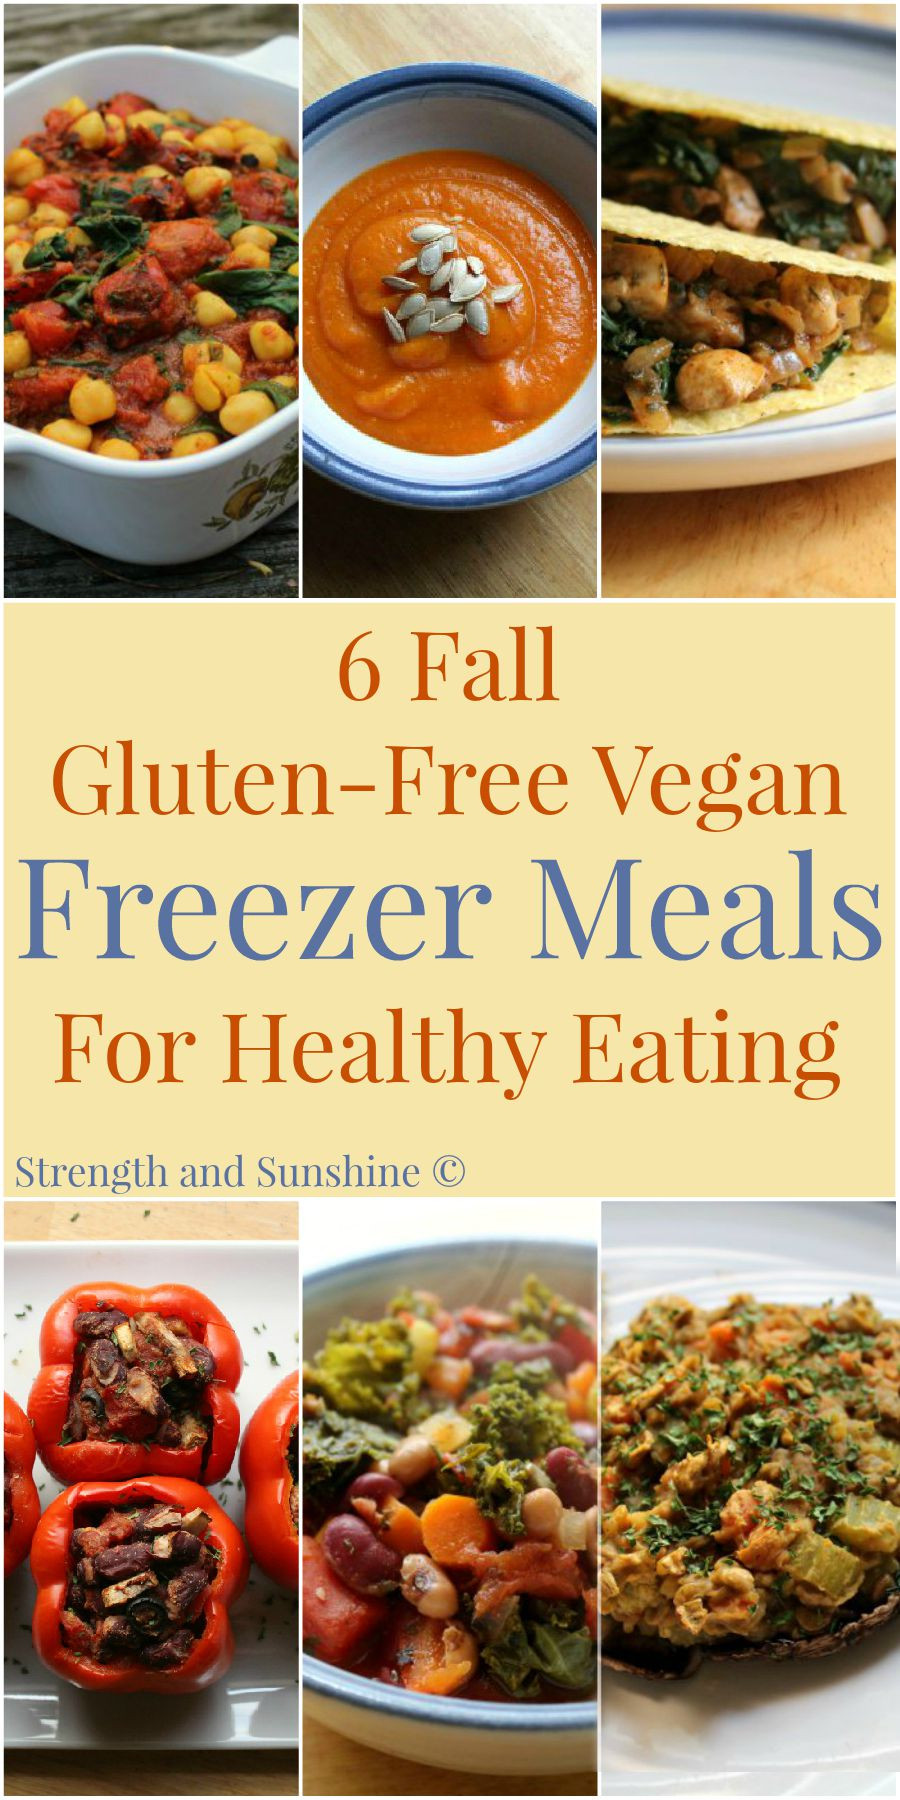 Healthy Gluten Free Dinners
 6 Fall Gluten Free Vegan Freezer Meals For Healthy Eating